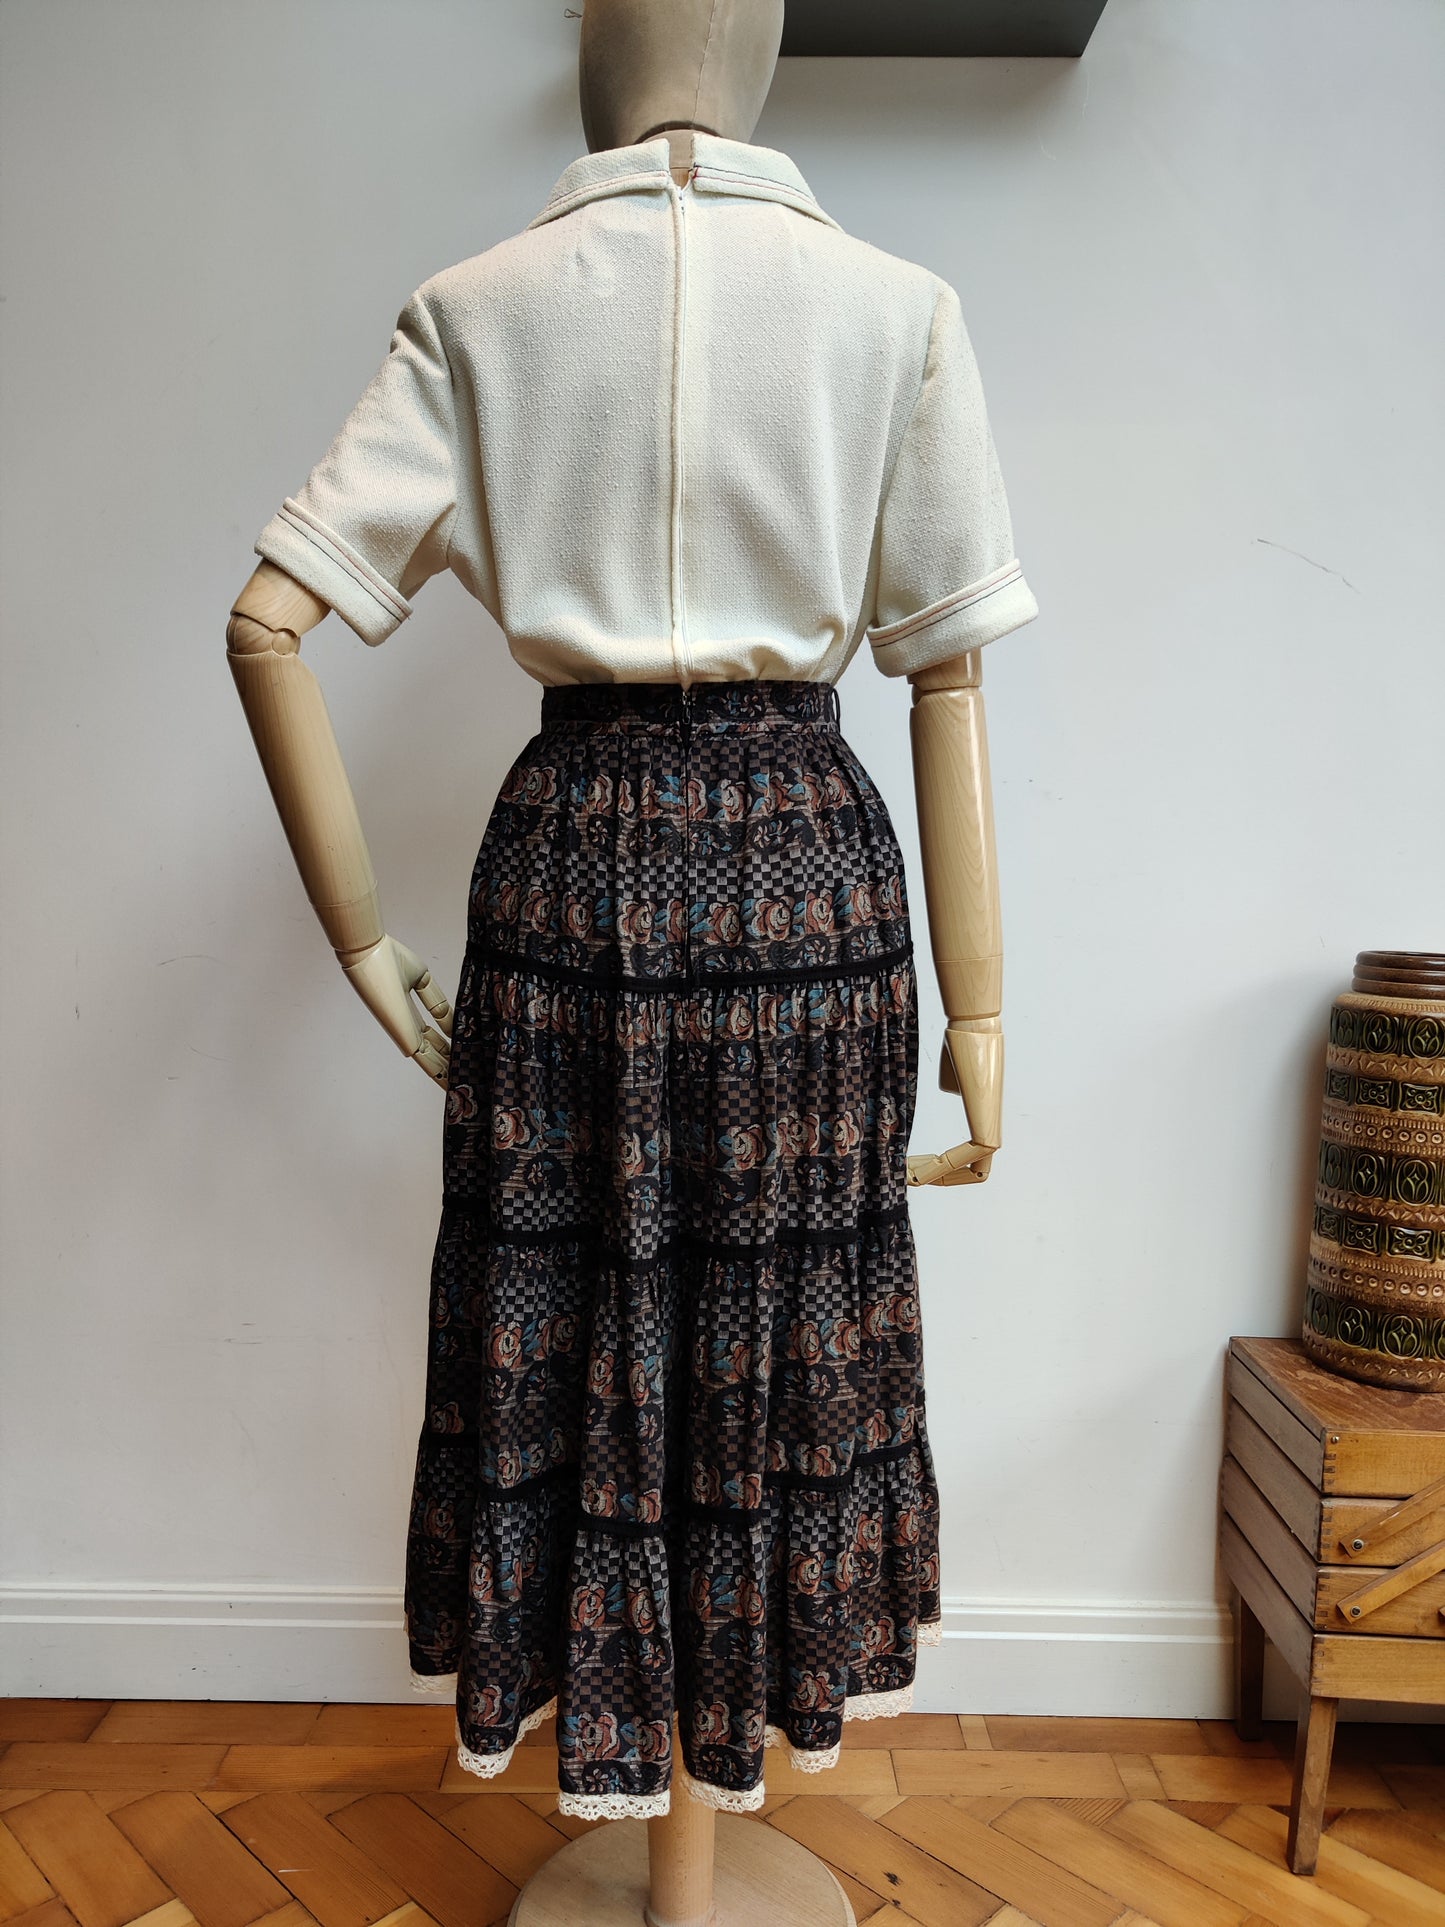 70's midi skirt with lace trim. black and brown boho print